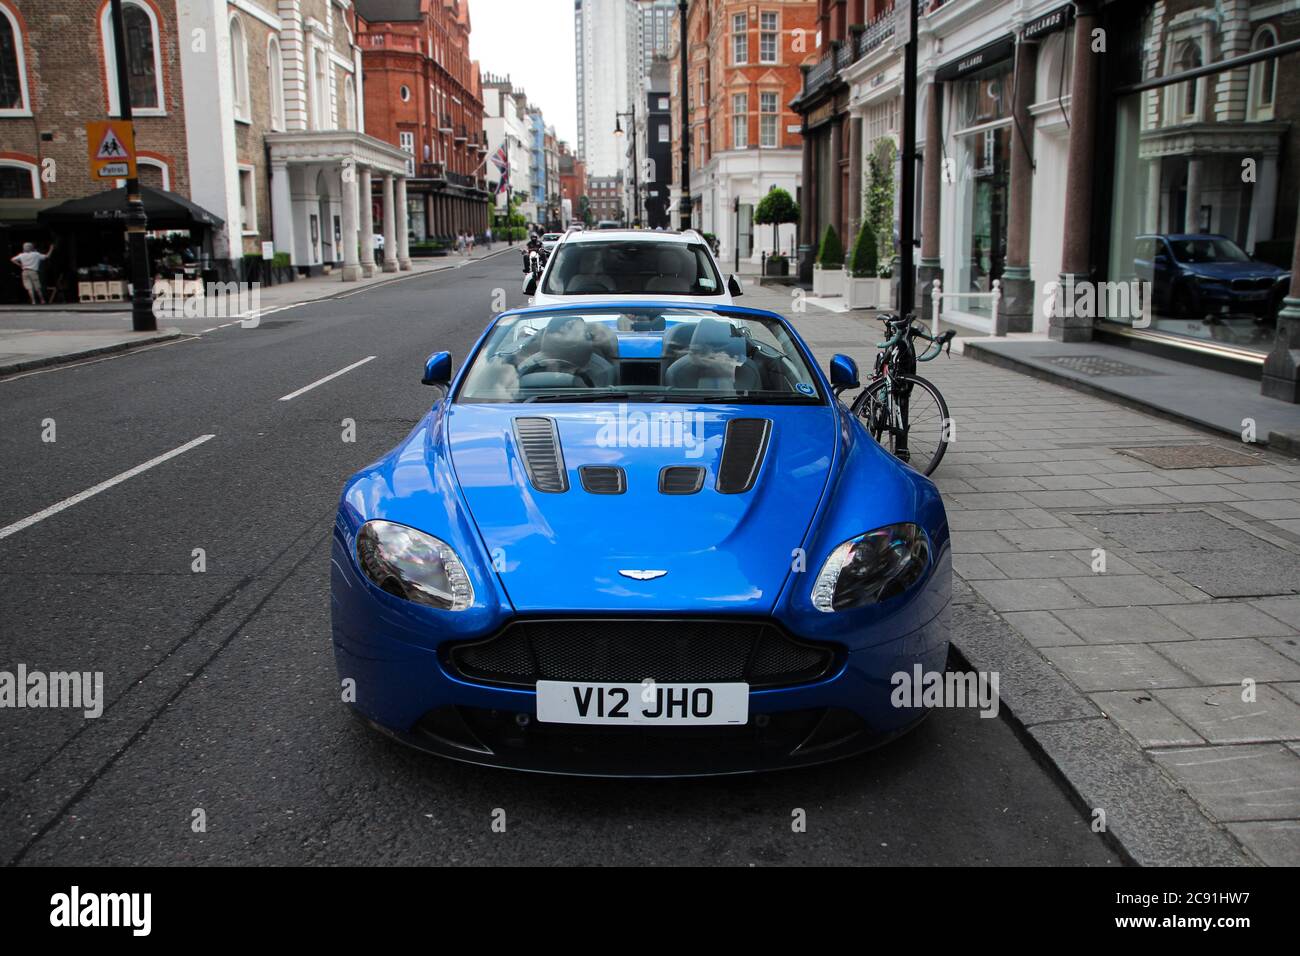 Blue Aston Martin V12 Vantage Volante modern supercar parked on a street of Mayfair area of Central London. Stock Photo